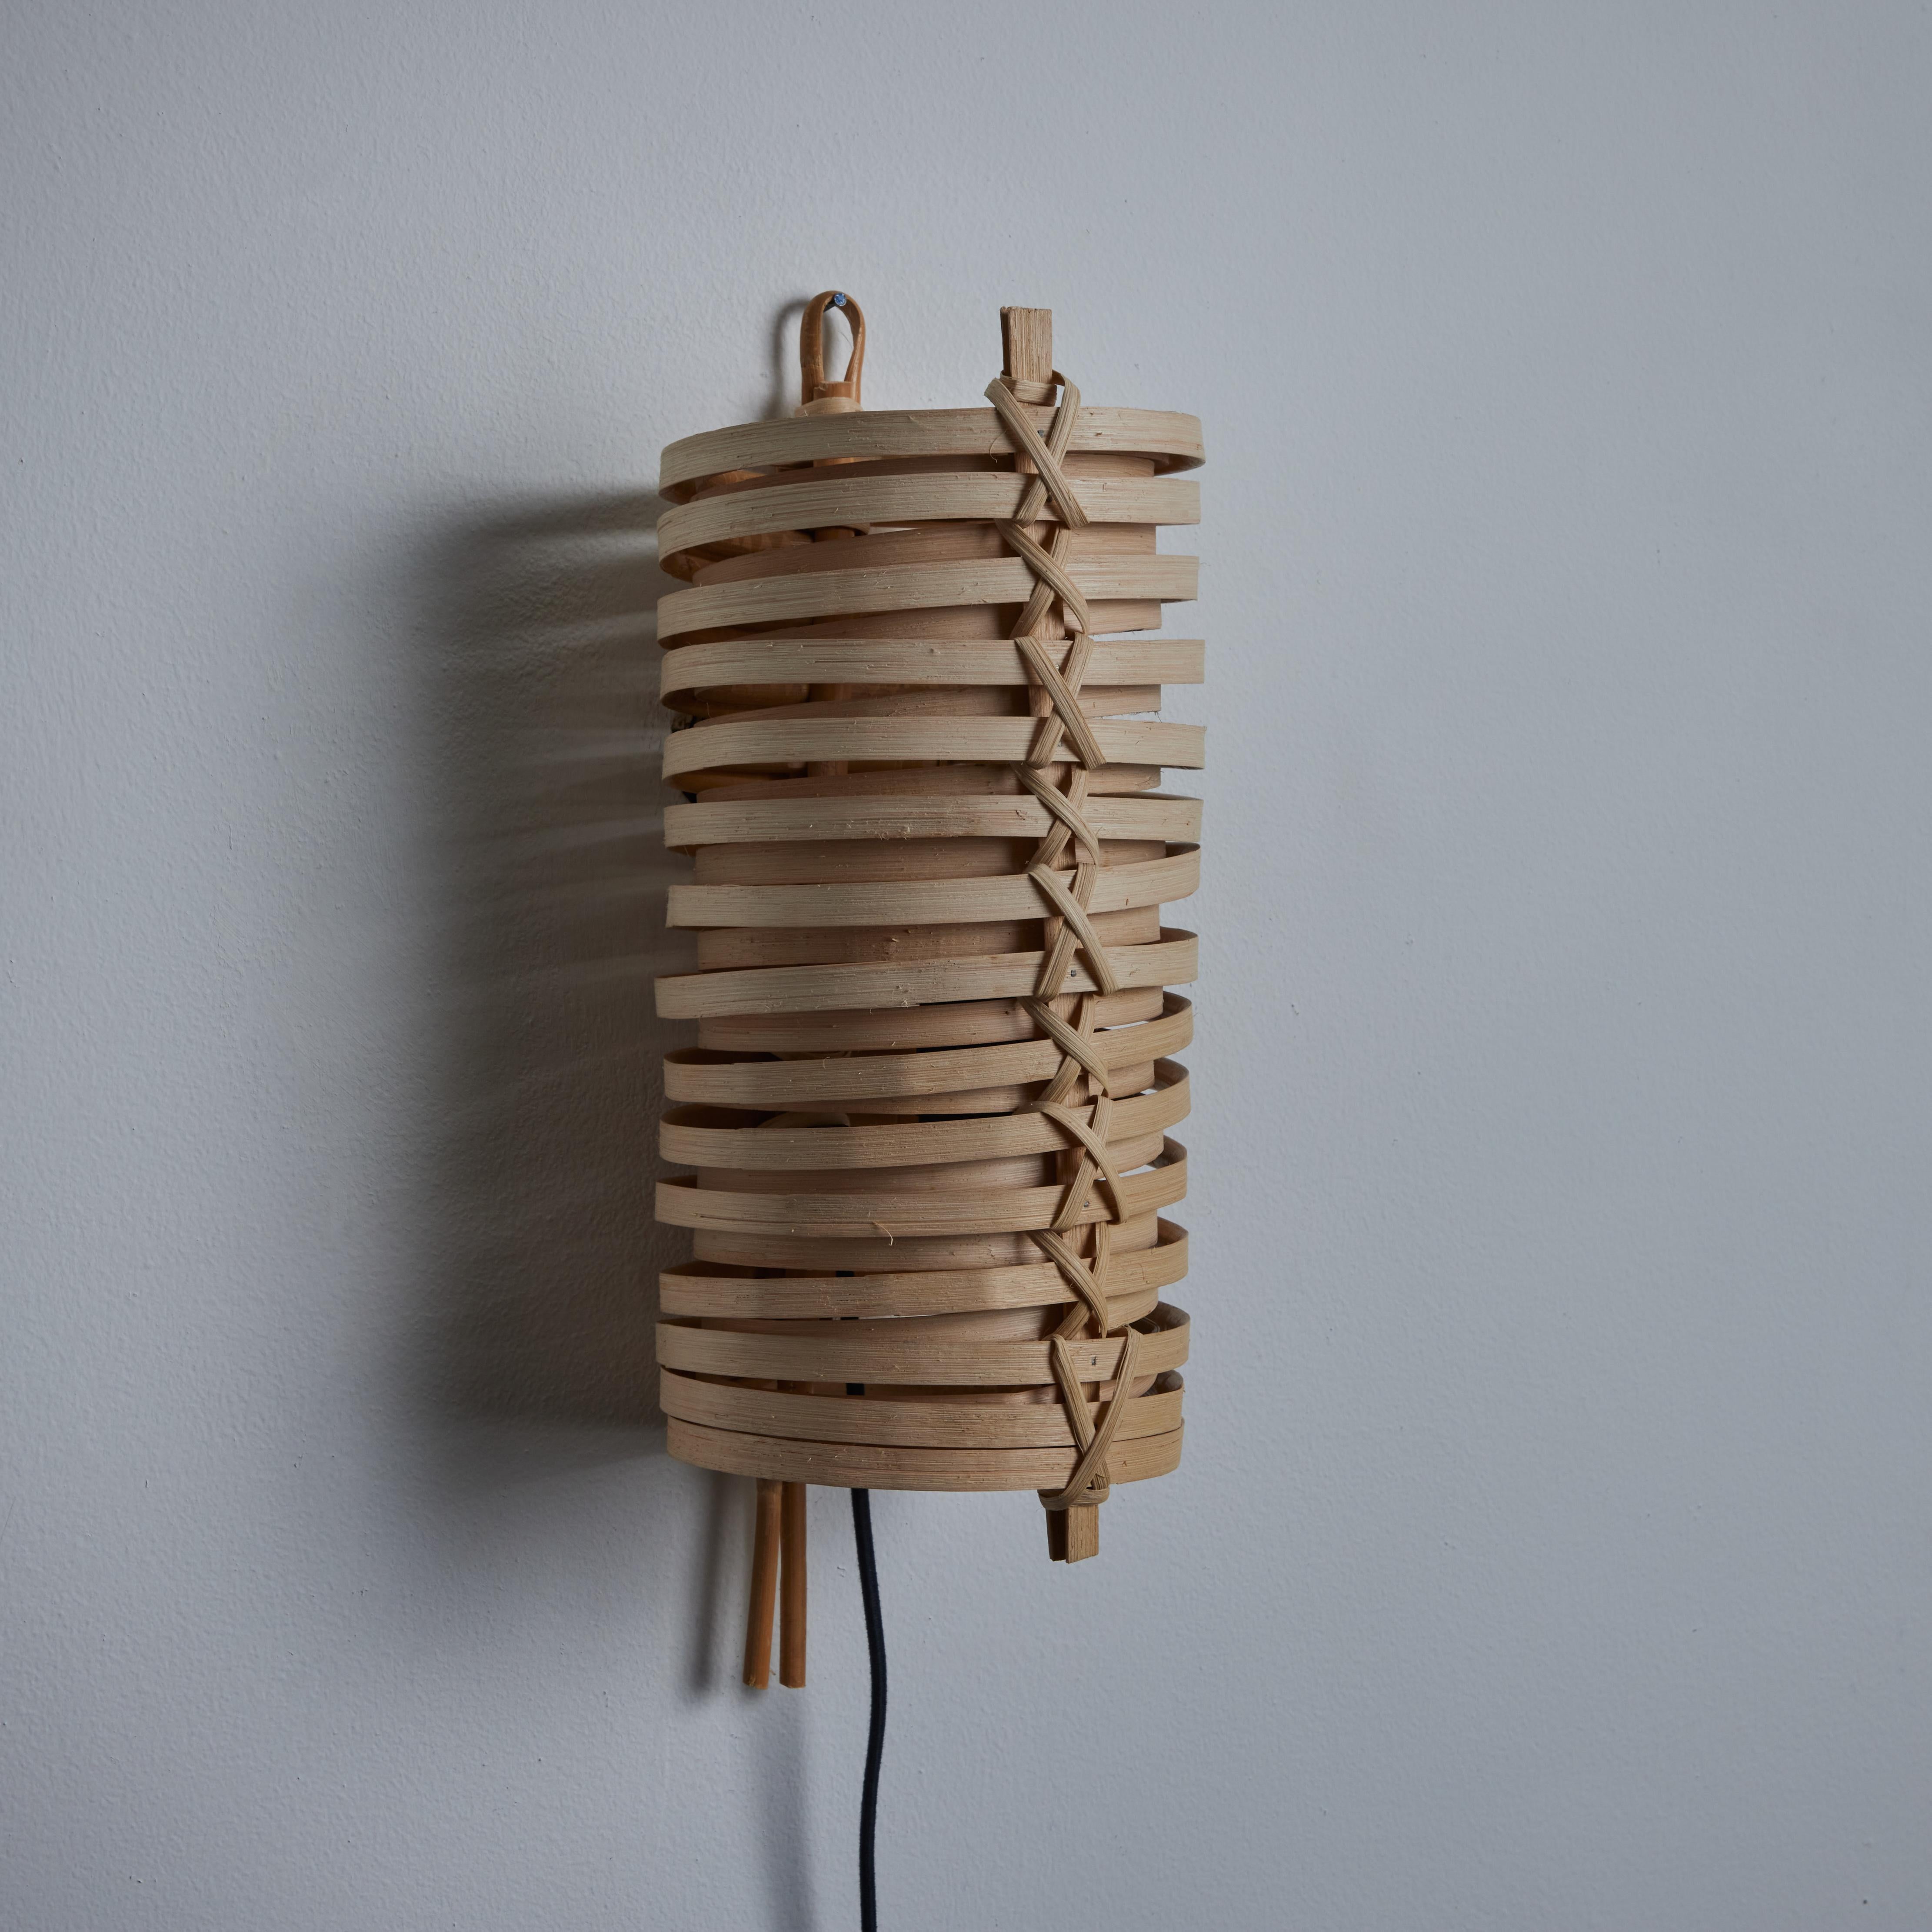 J.A. Coderch 'Junco' Rattan Cane Wall Lamp for Tunds For Sale 3